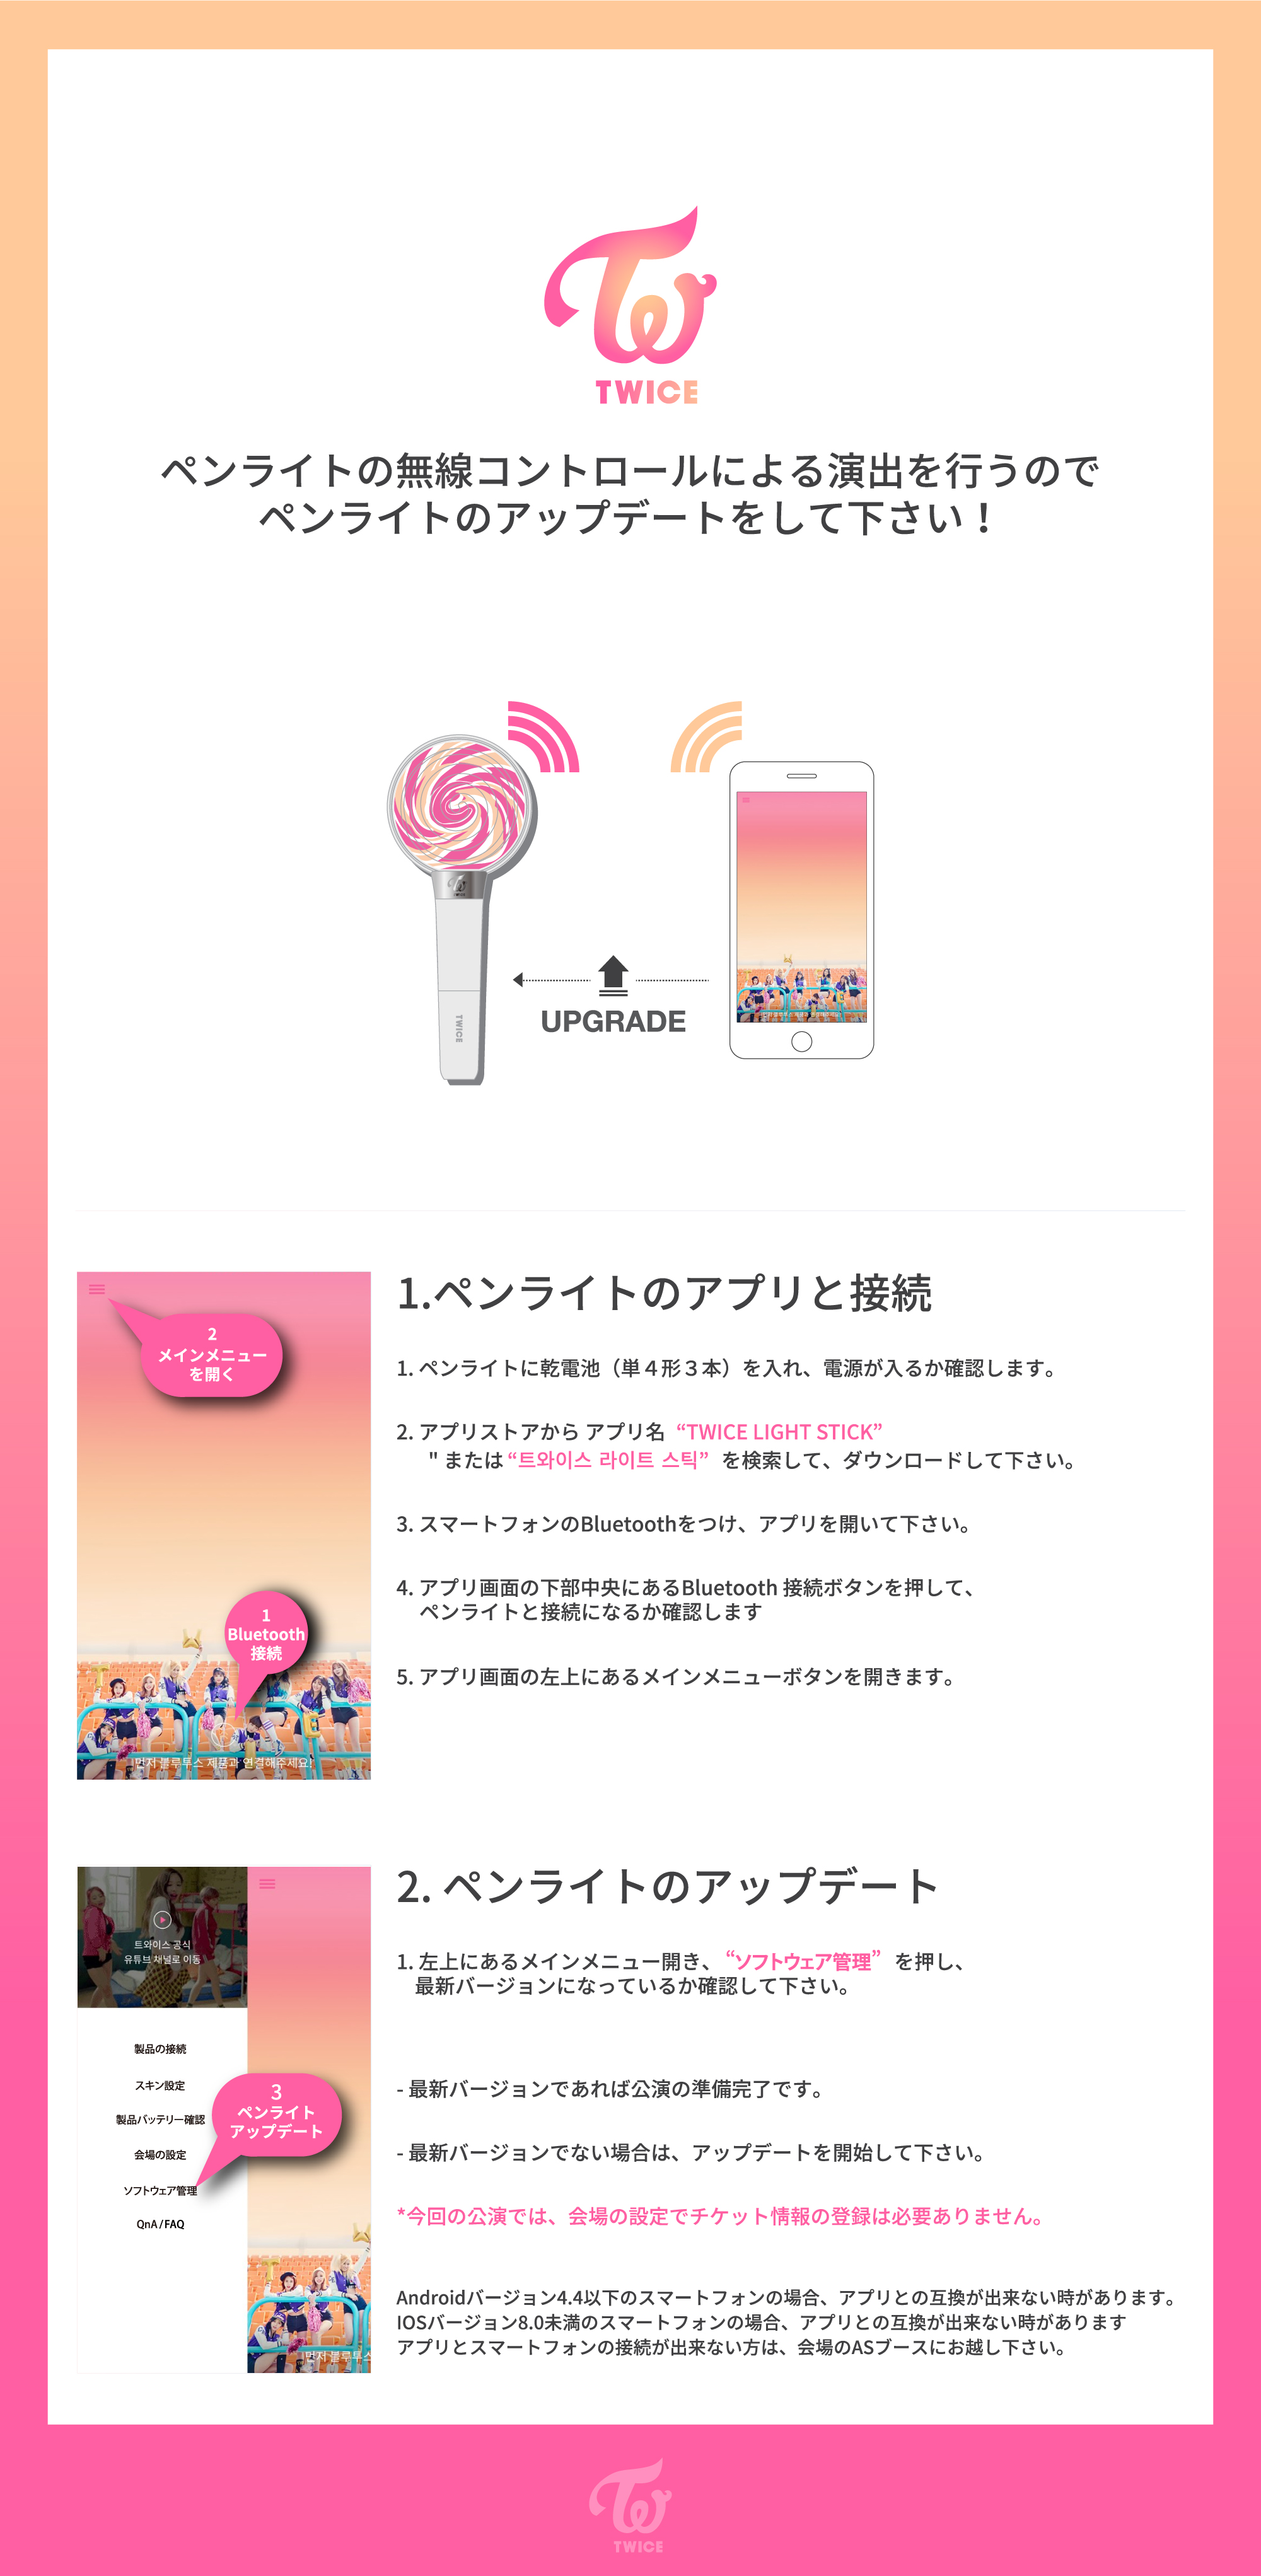 Twice Official Fanclub Once Japan